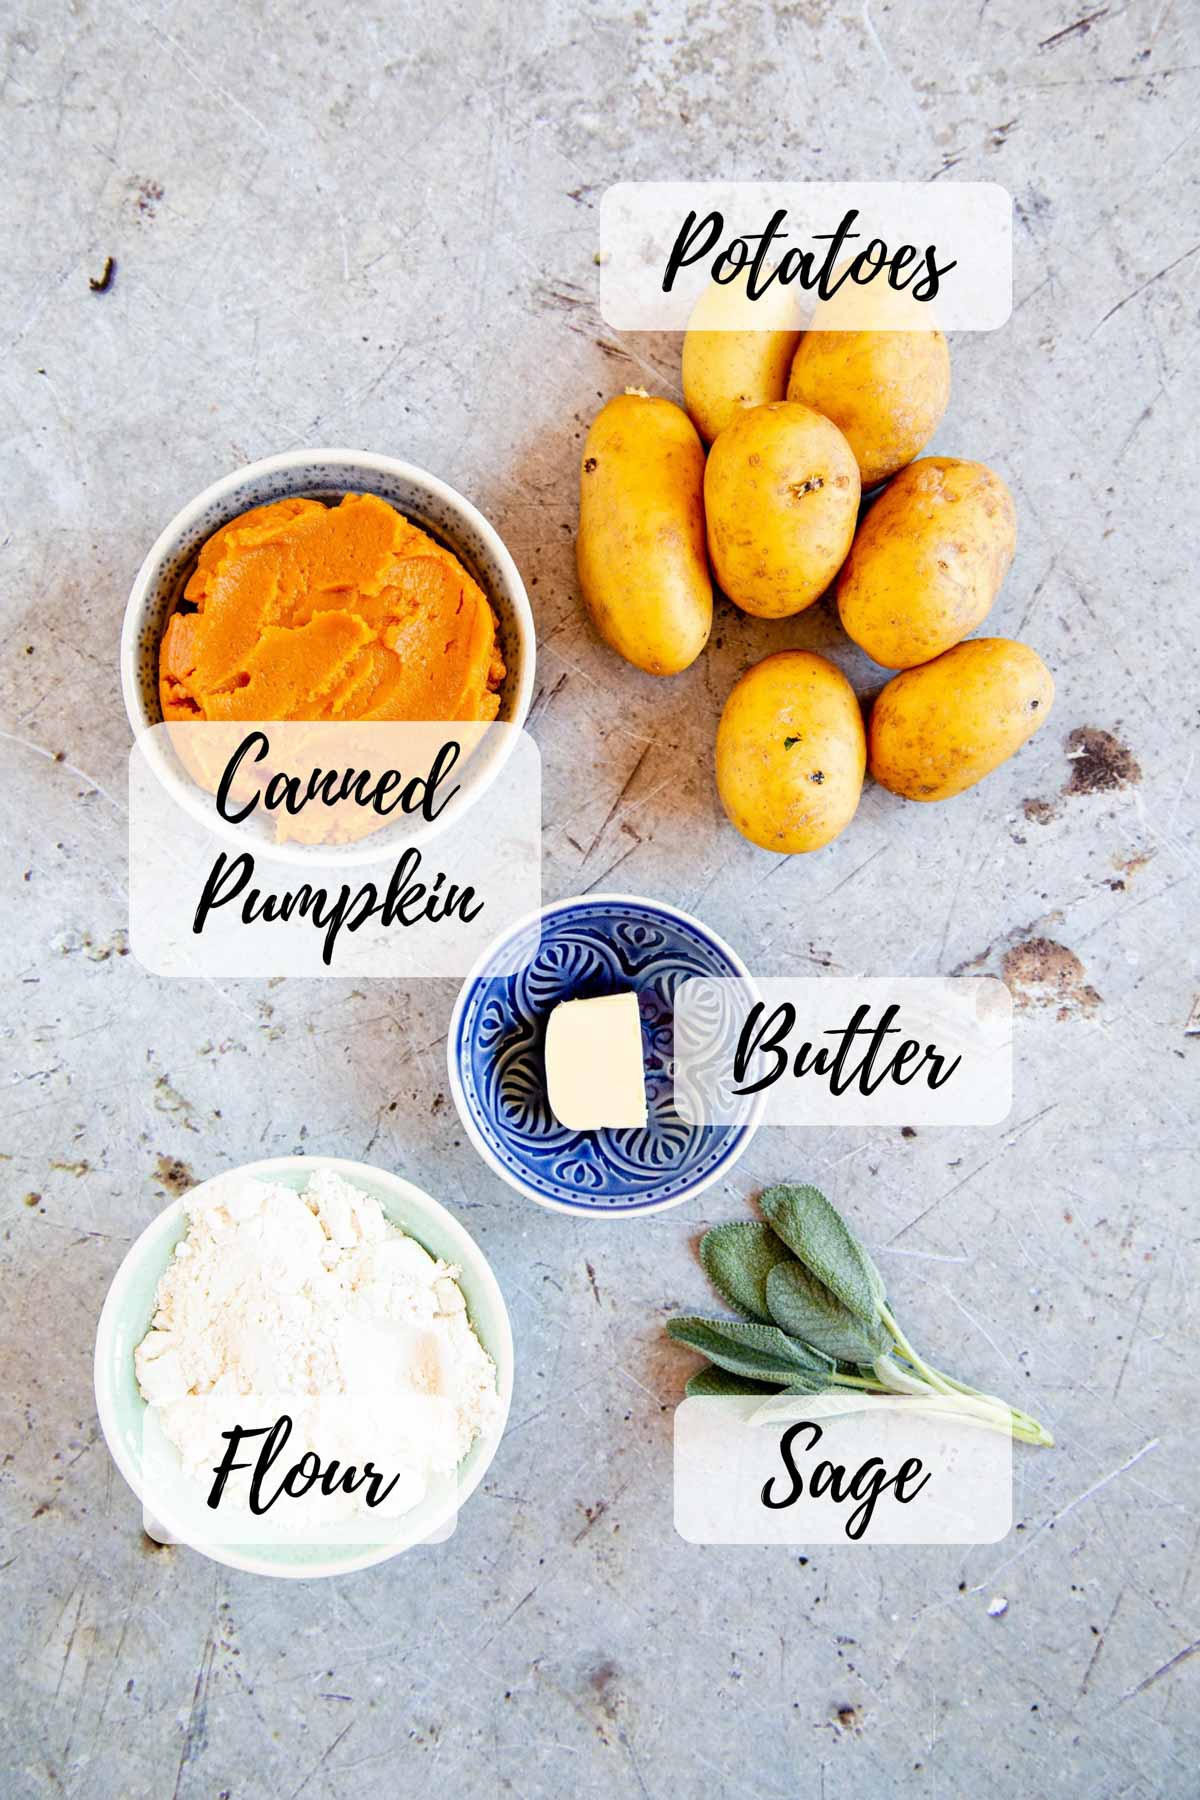 The ingredients gathered: canned pumpkin, potatoes, butter, sage and flour